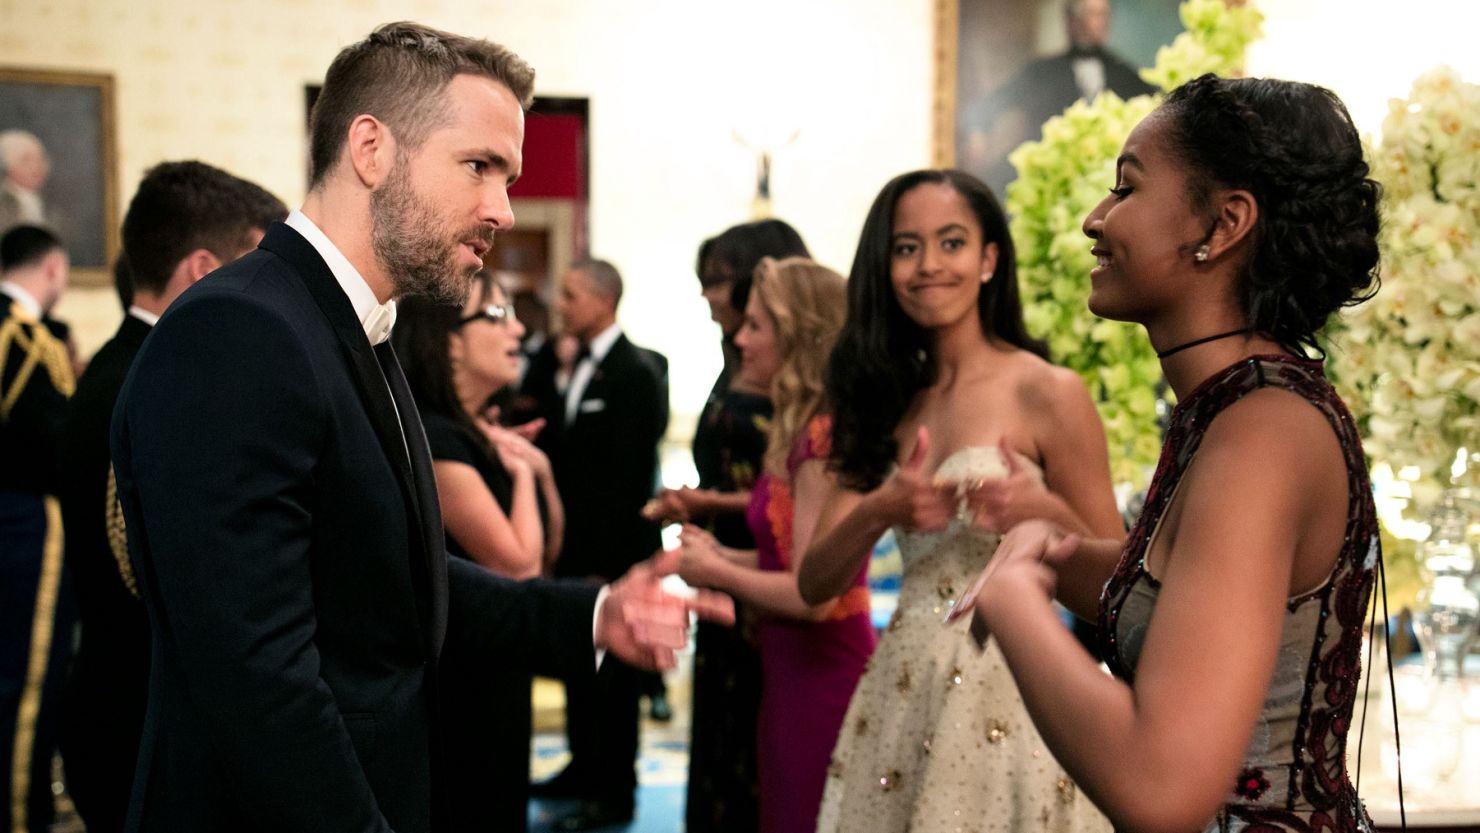 Malia Obama offered some sisterly support as Sasha Obama talked to "Dead Pool" star Ryan Reynolds. 